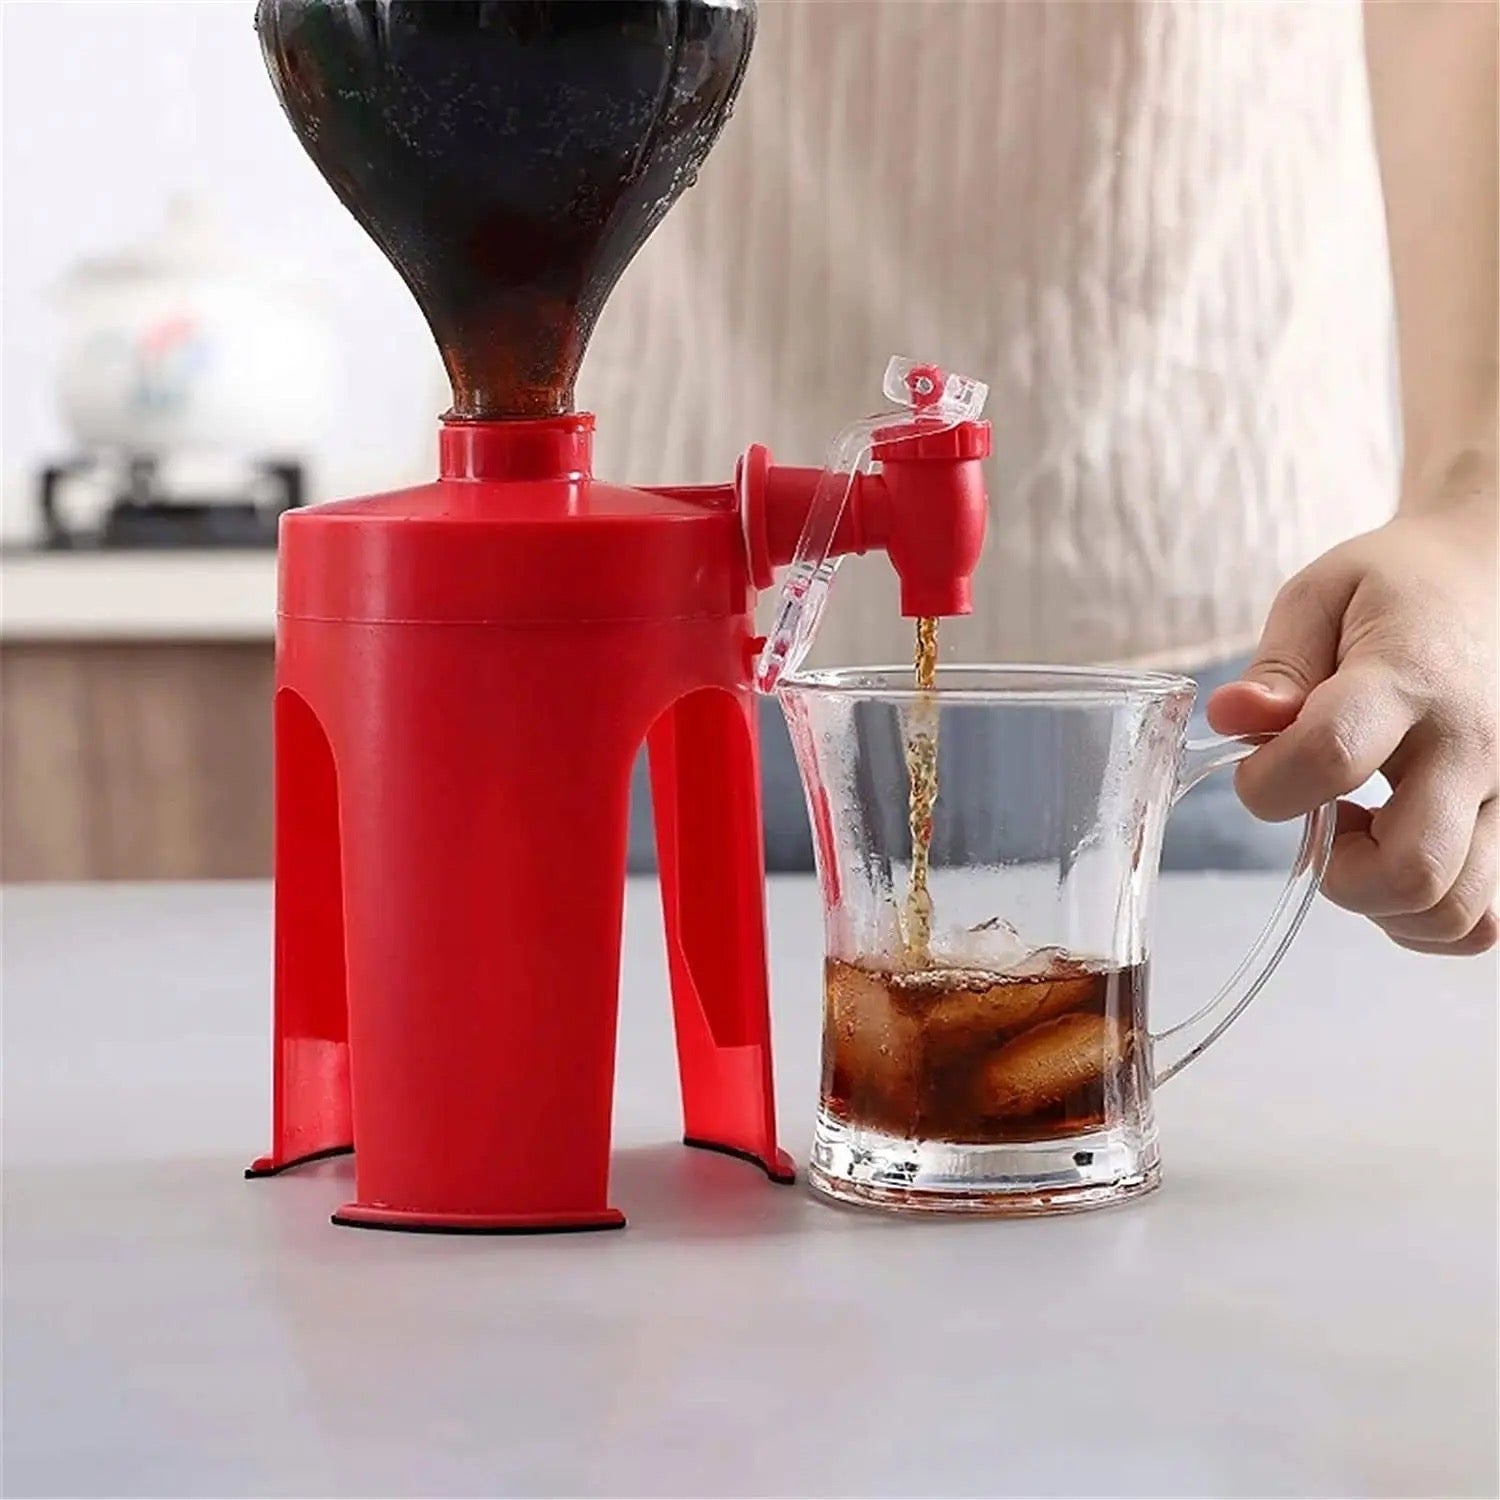  A person utilizes the Inverted Easy Soda & Cool Drinks Dispenser to pour a beverage